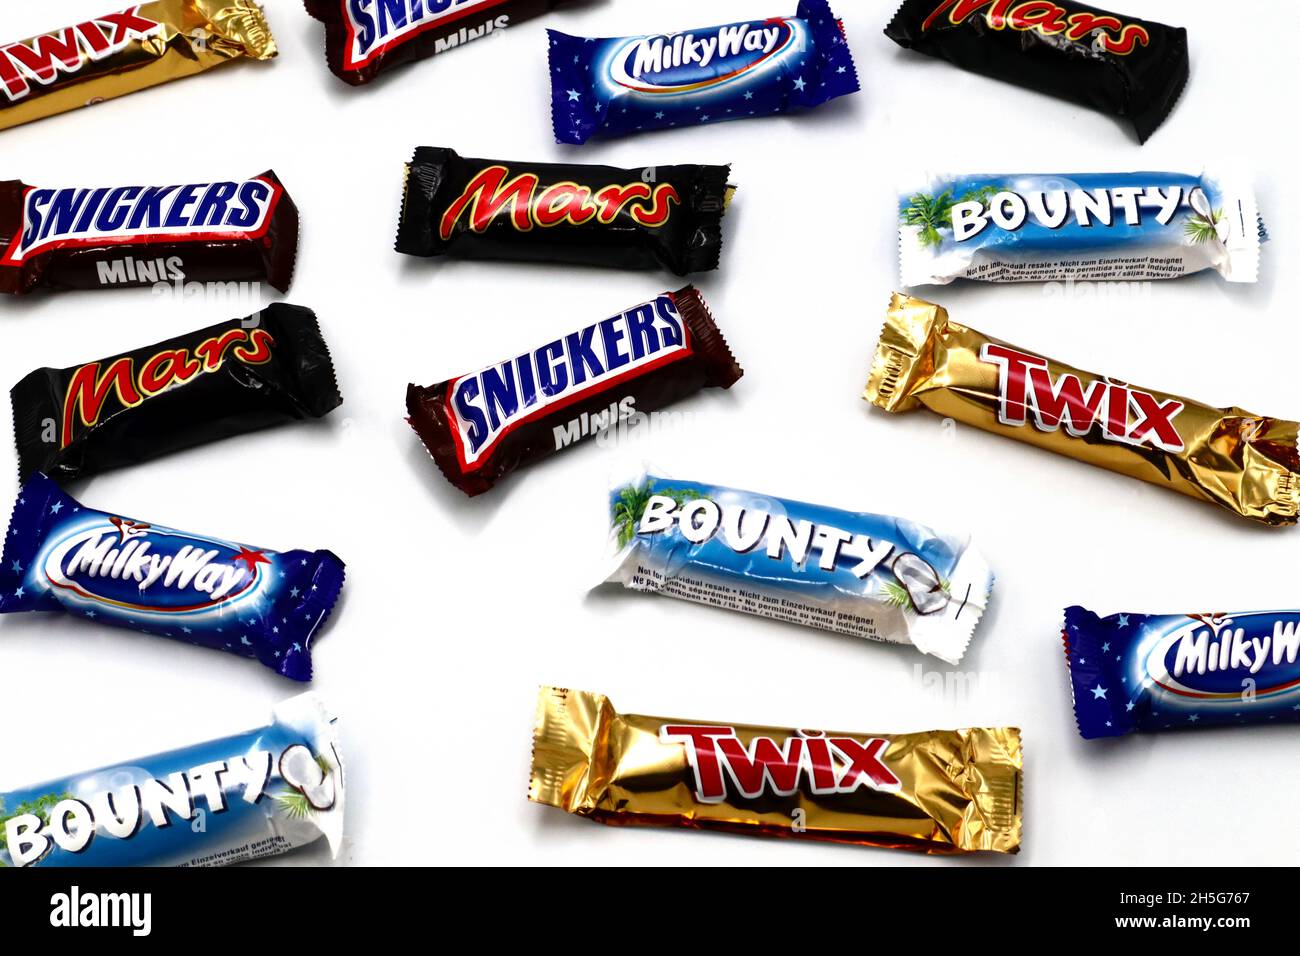 Mars, Bounty, Snickers, Milky Way and Twix chocolate bars, brands of Mars  Incorporated Stock Photo - Alamy